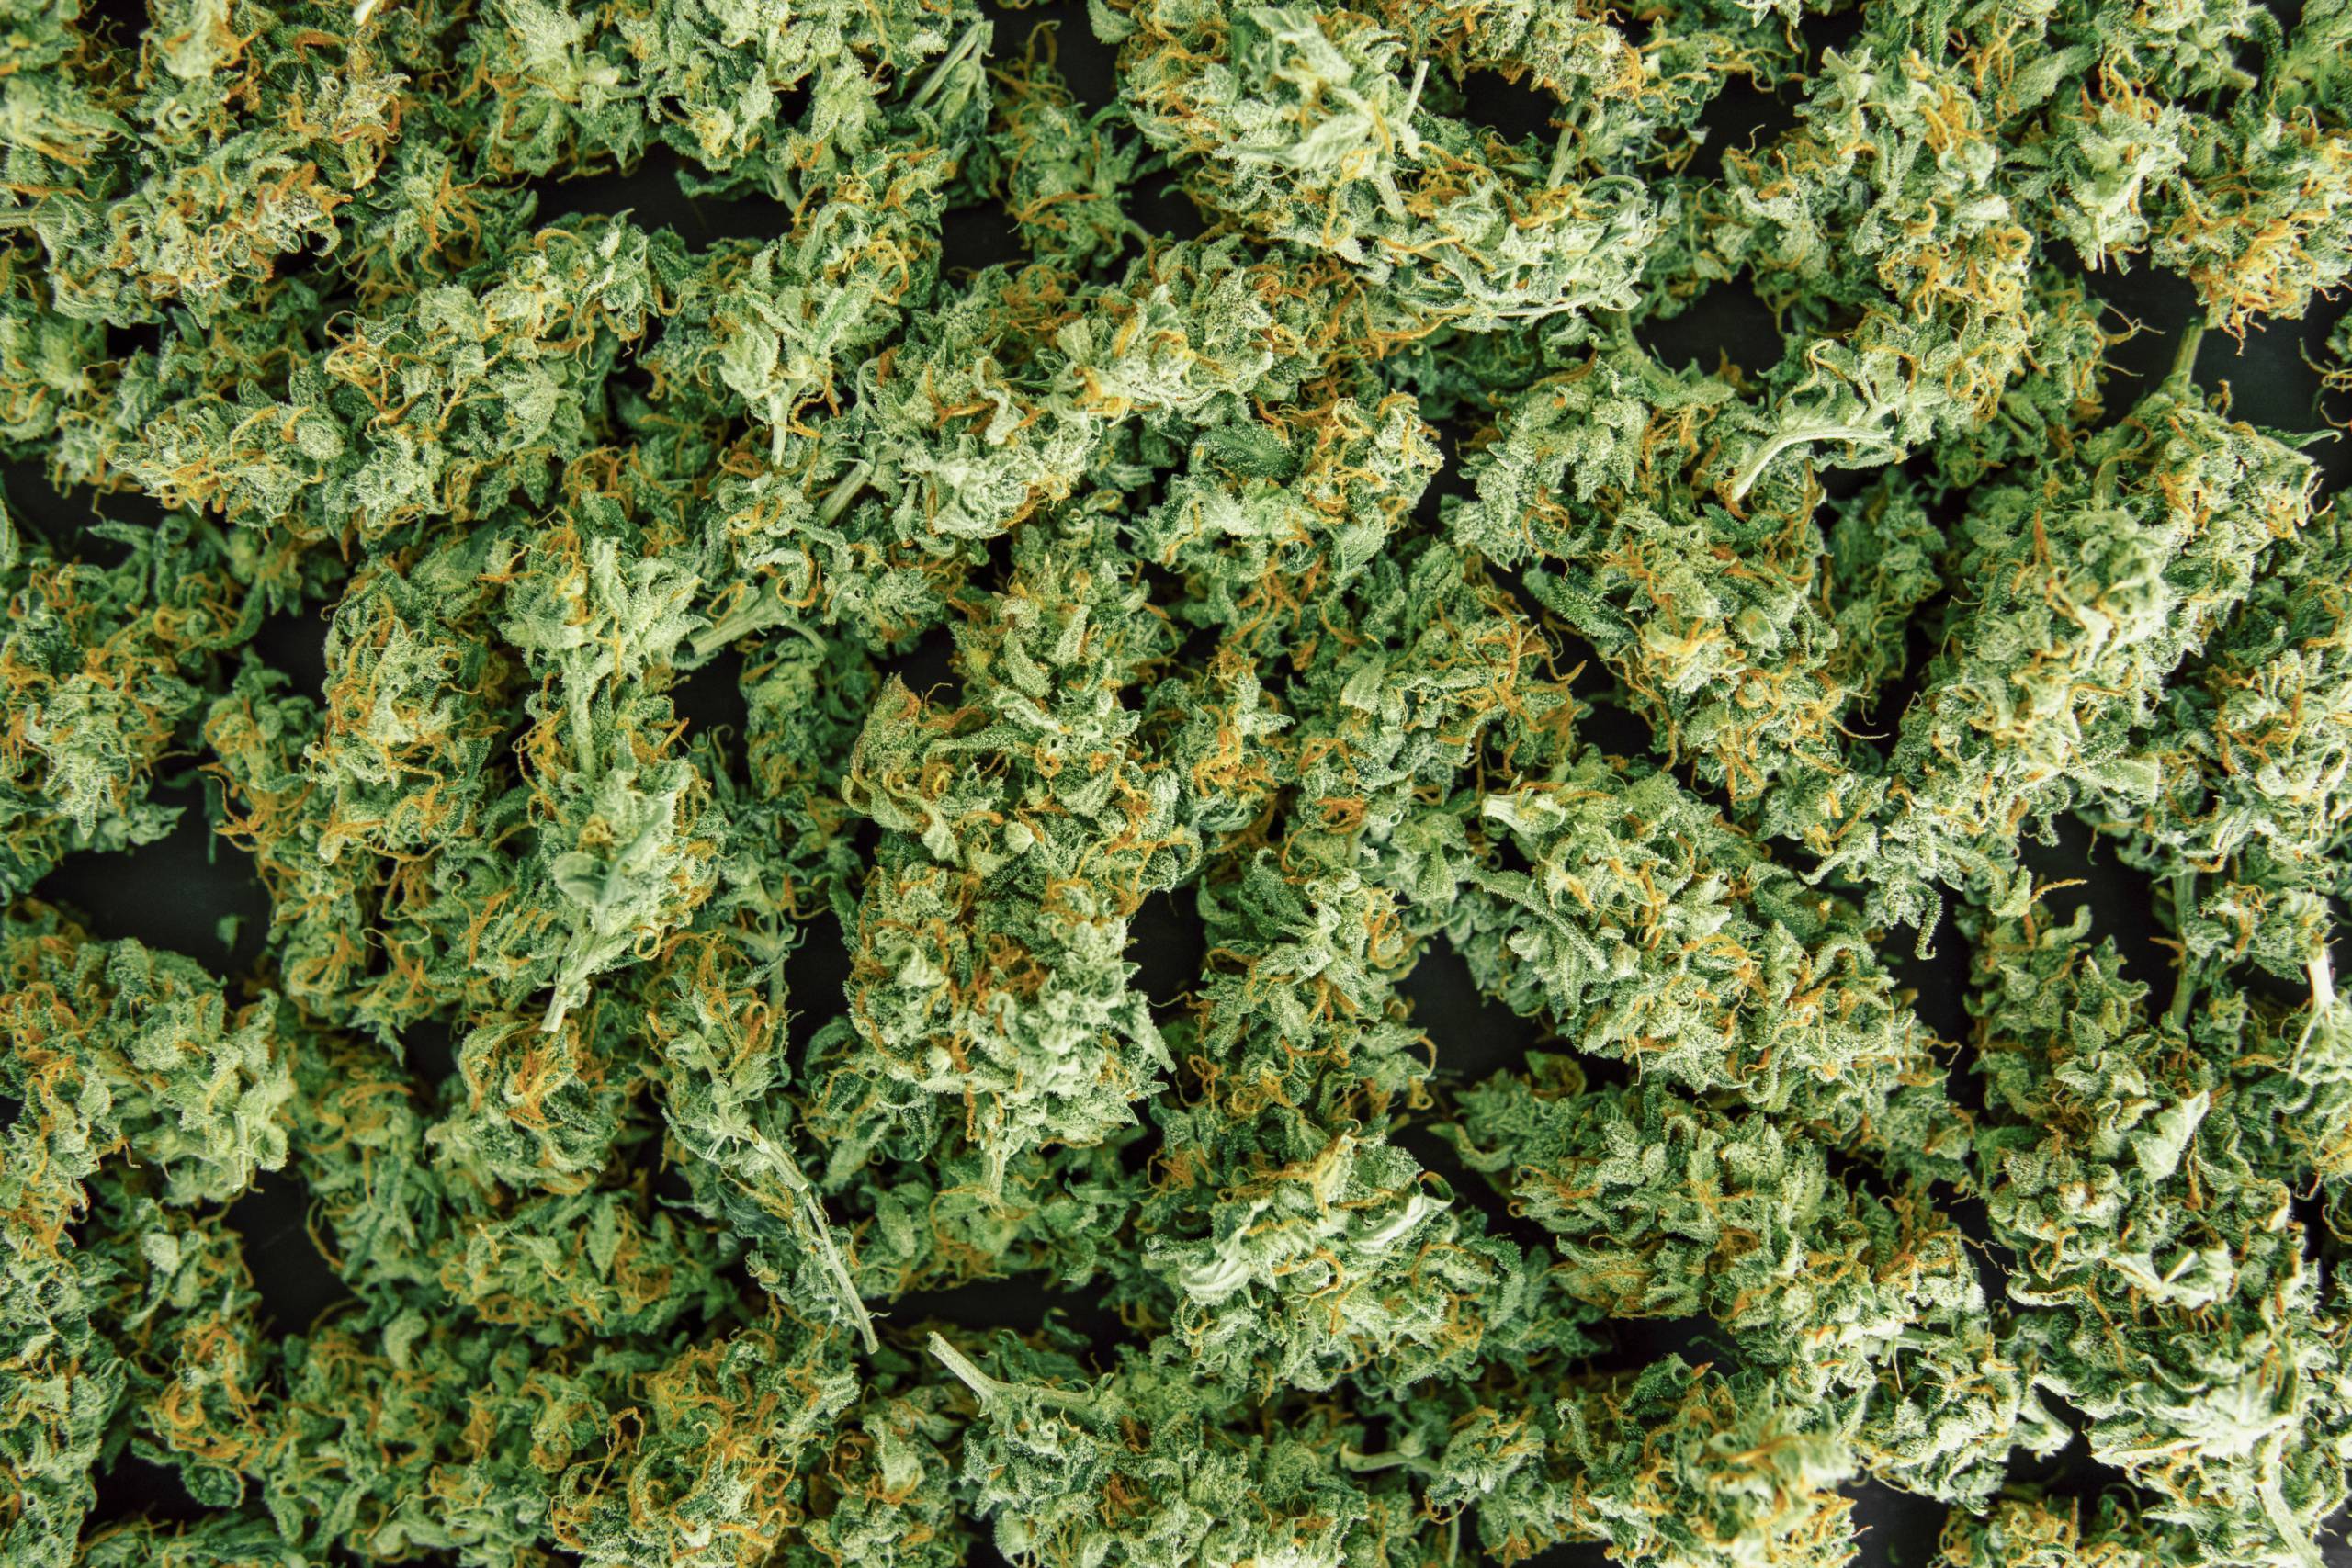 Save on marijuana prices by buying in bulk of cannabis. SpeedGreens